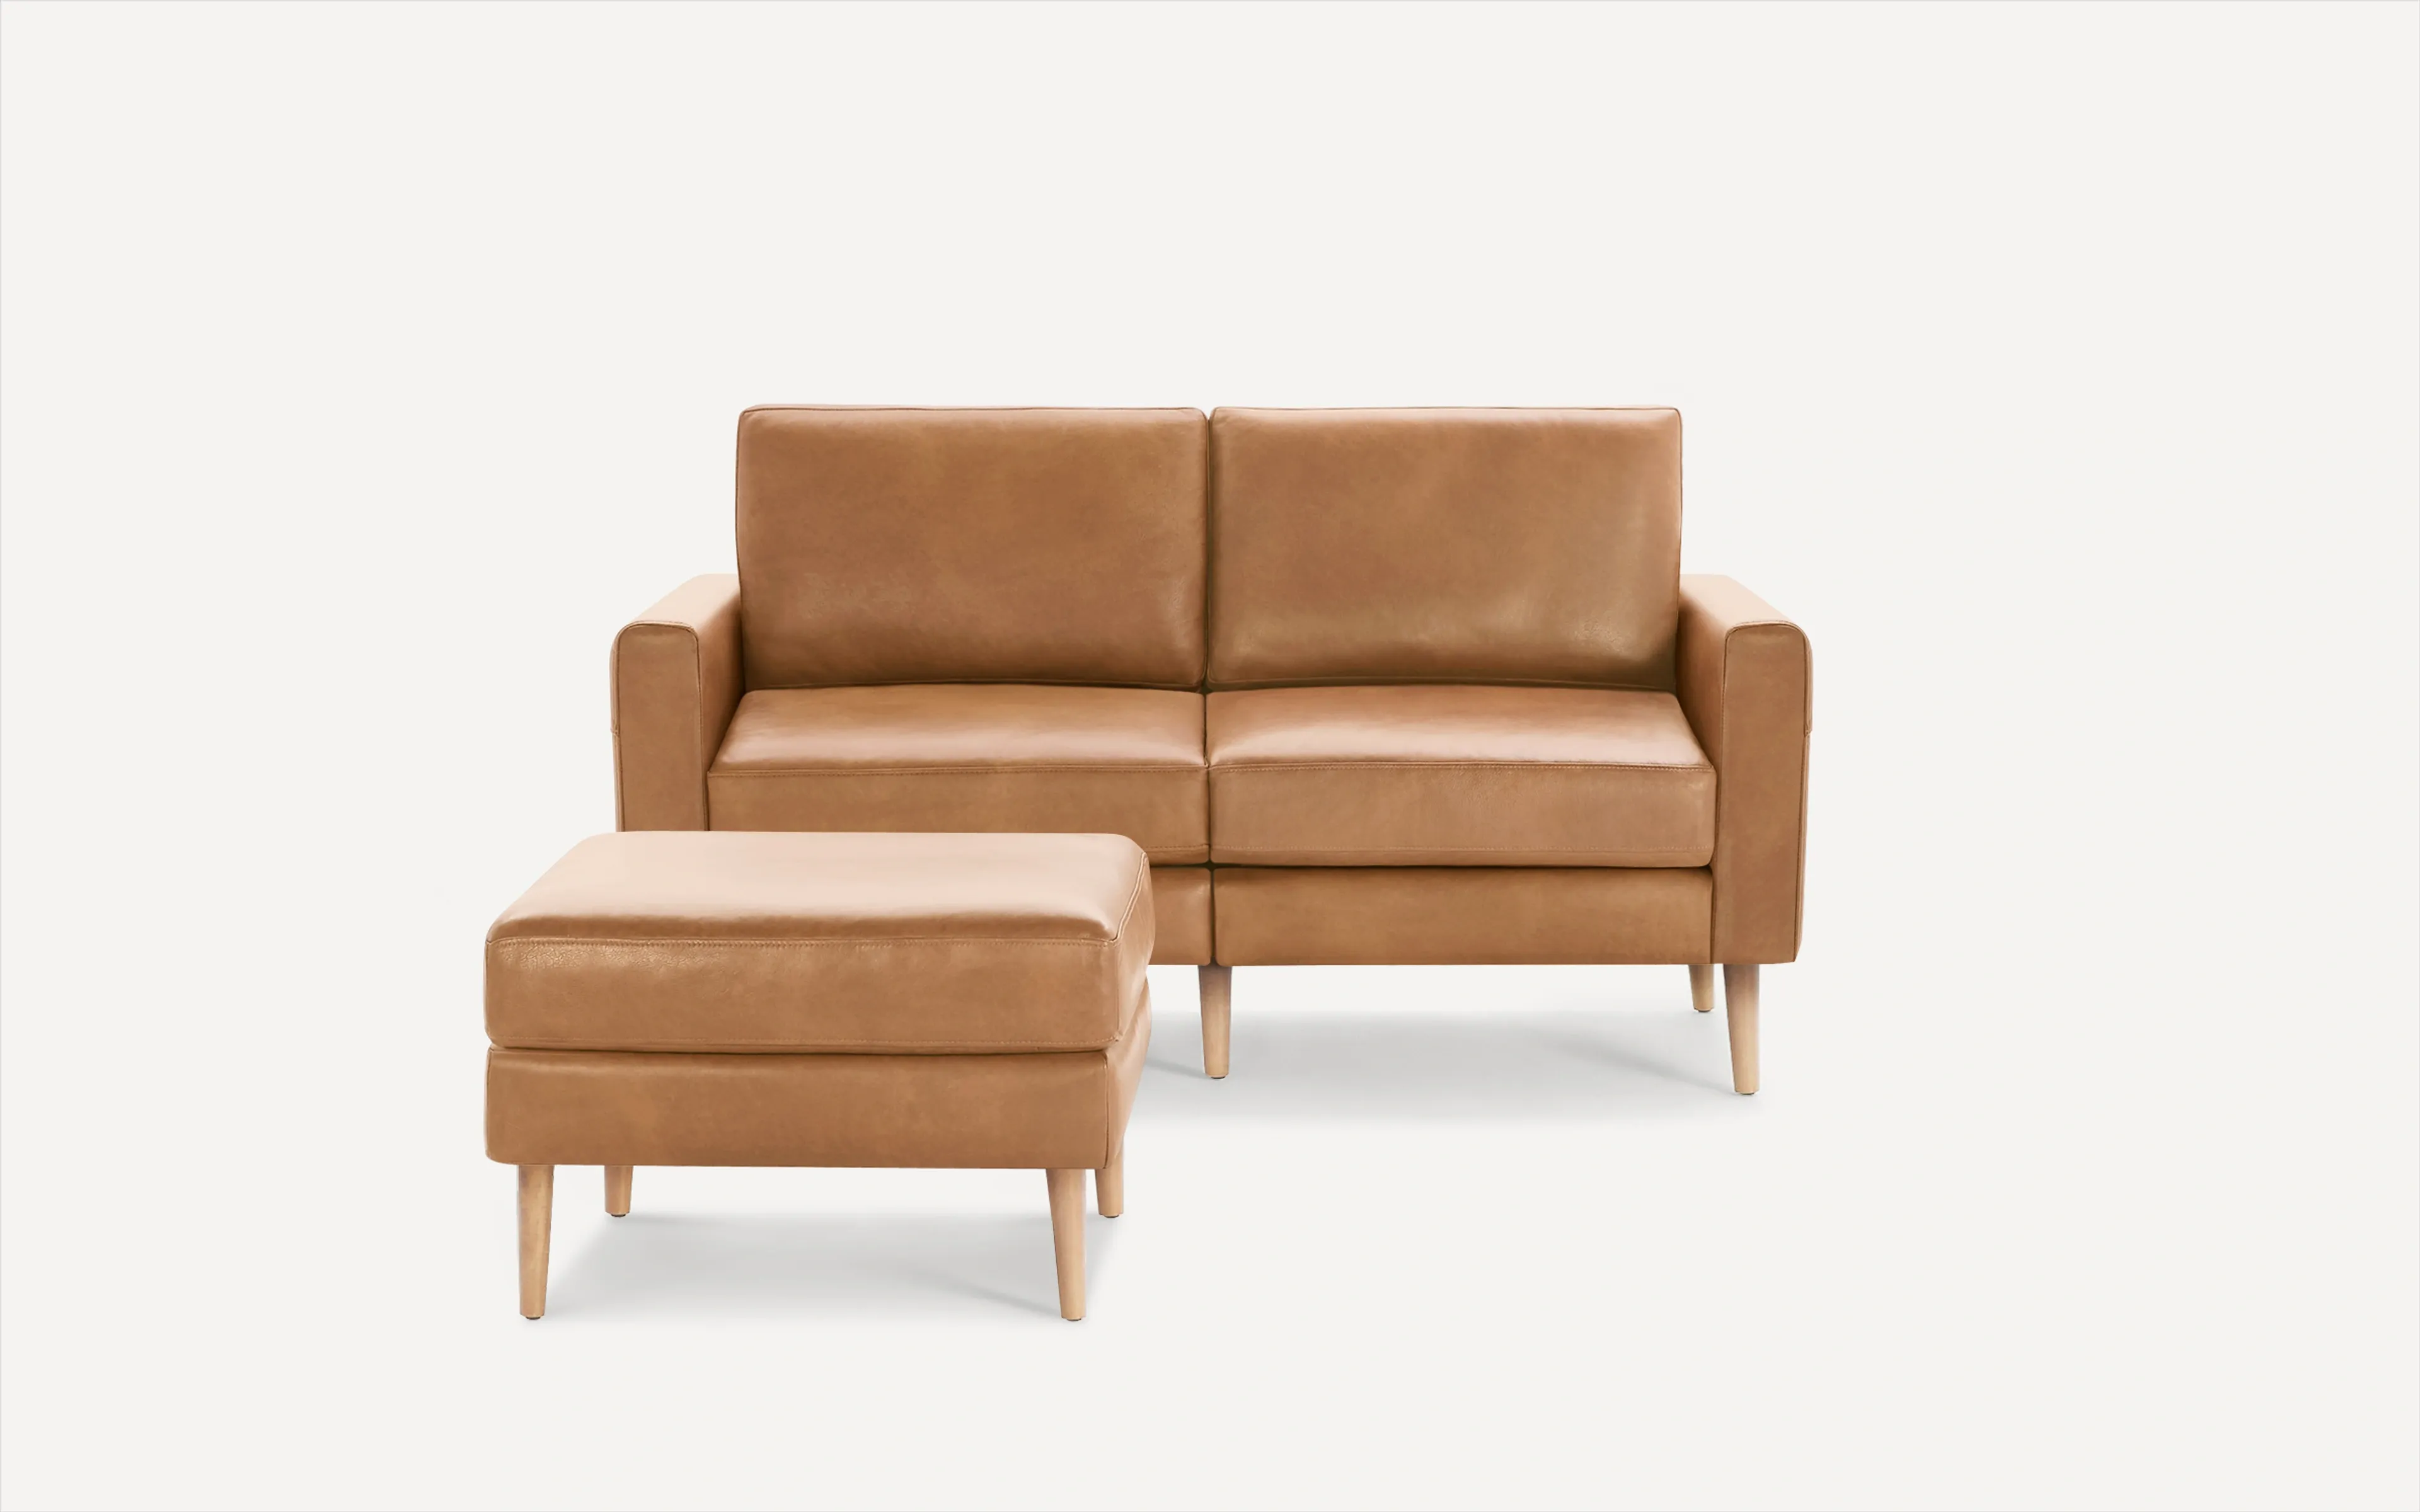 Original Nomad Loveseat with Ottoman in Camel Leather